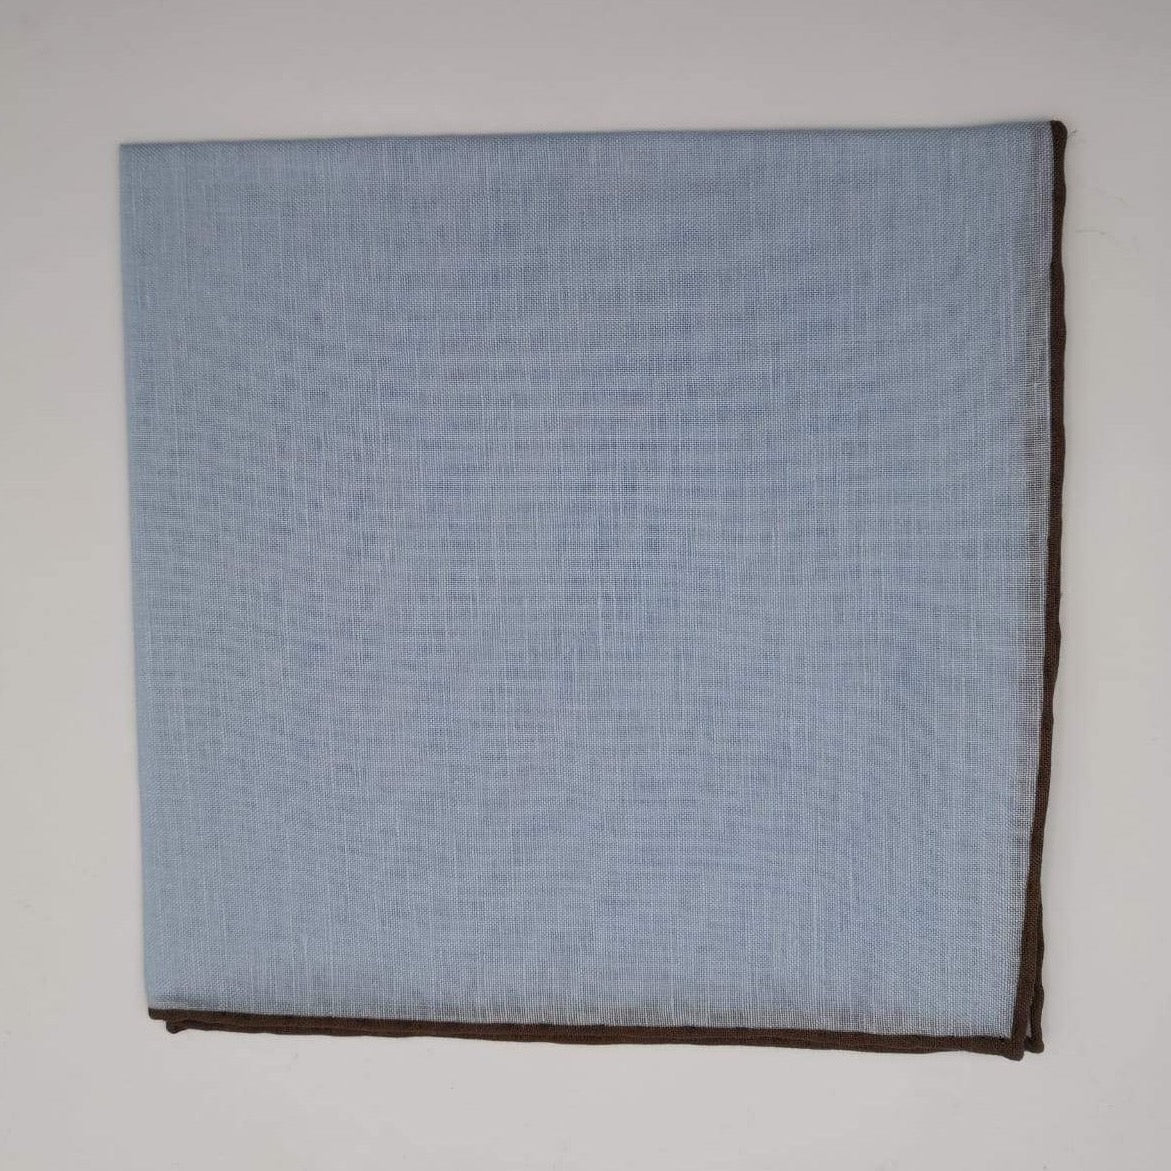 Cruciani & Bella 60%Linen  40% Cotton Hand-rolled  -  Pocket Square Light Blue and Brown Handmade in Italy 39 cm X 39cm #4557 